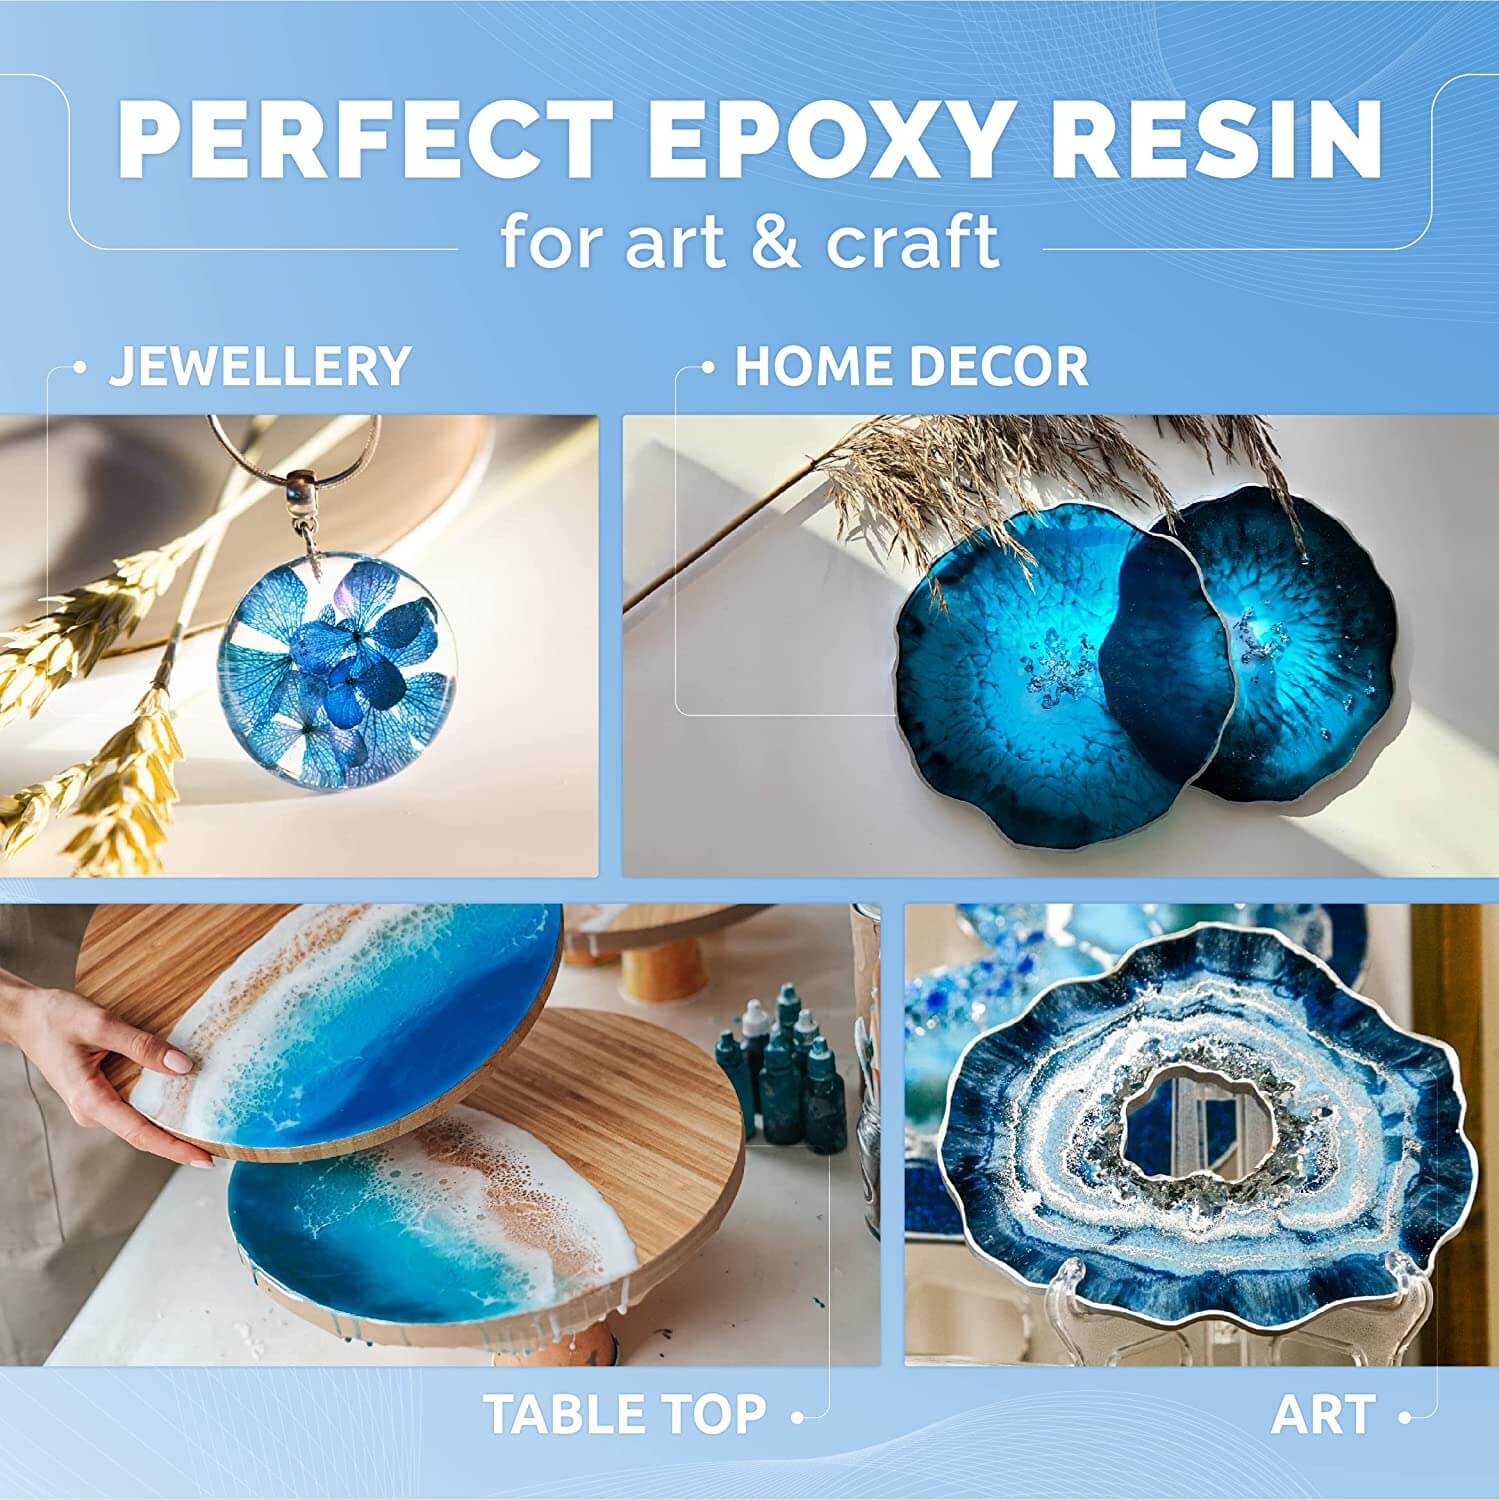 DR. CRAFTY Epoxy Resin Kit - 2 Part, 2 Gallon, Clear, Ideal for Wood  Finishes, Craft, Jewelry Casting, DIY, Tumblers & More